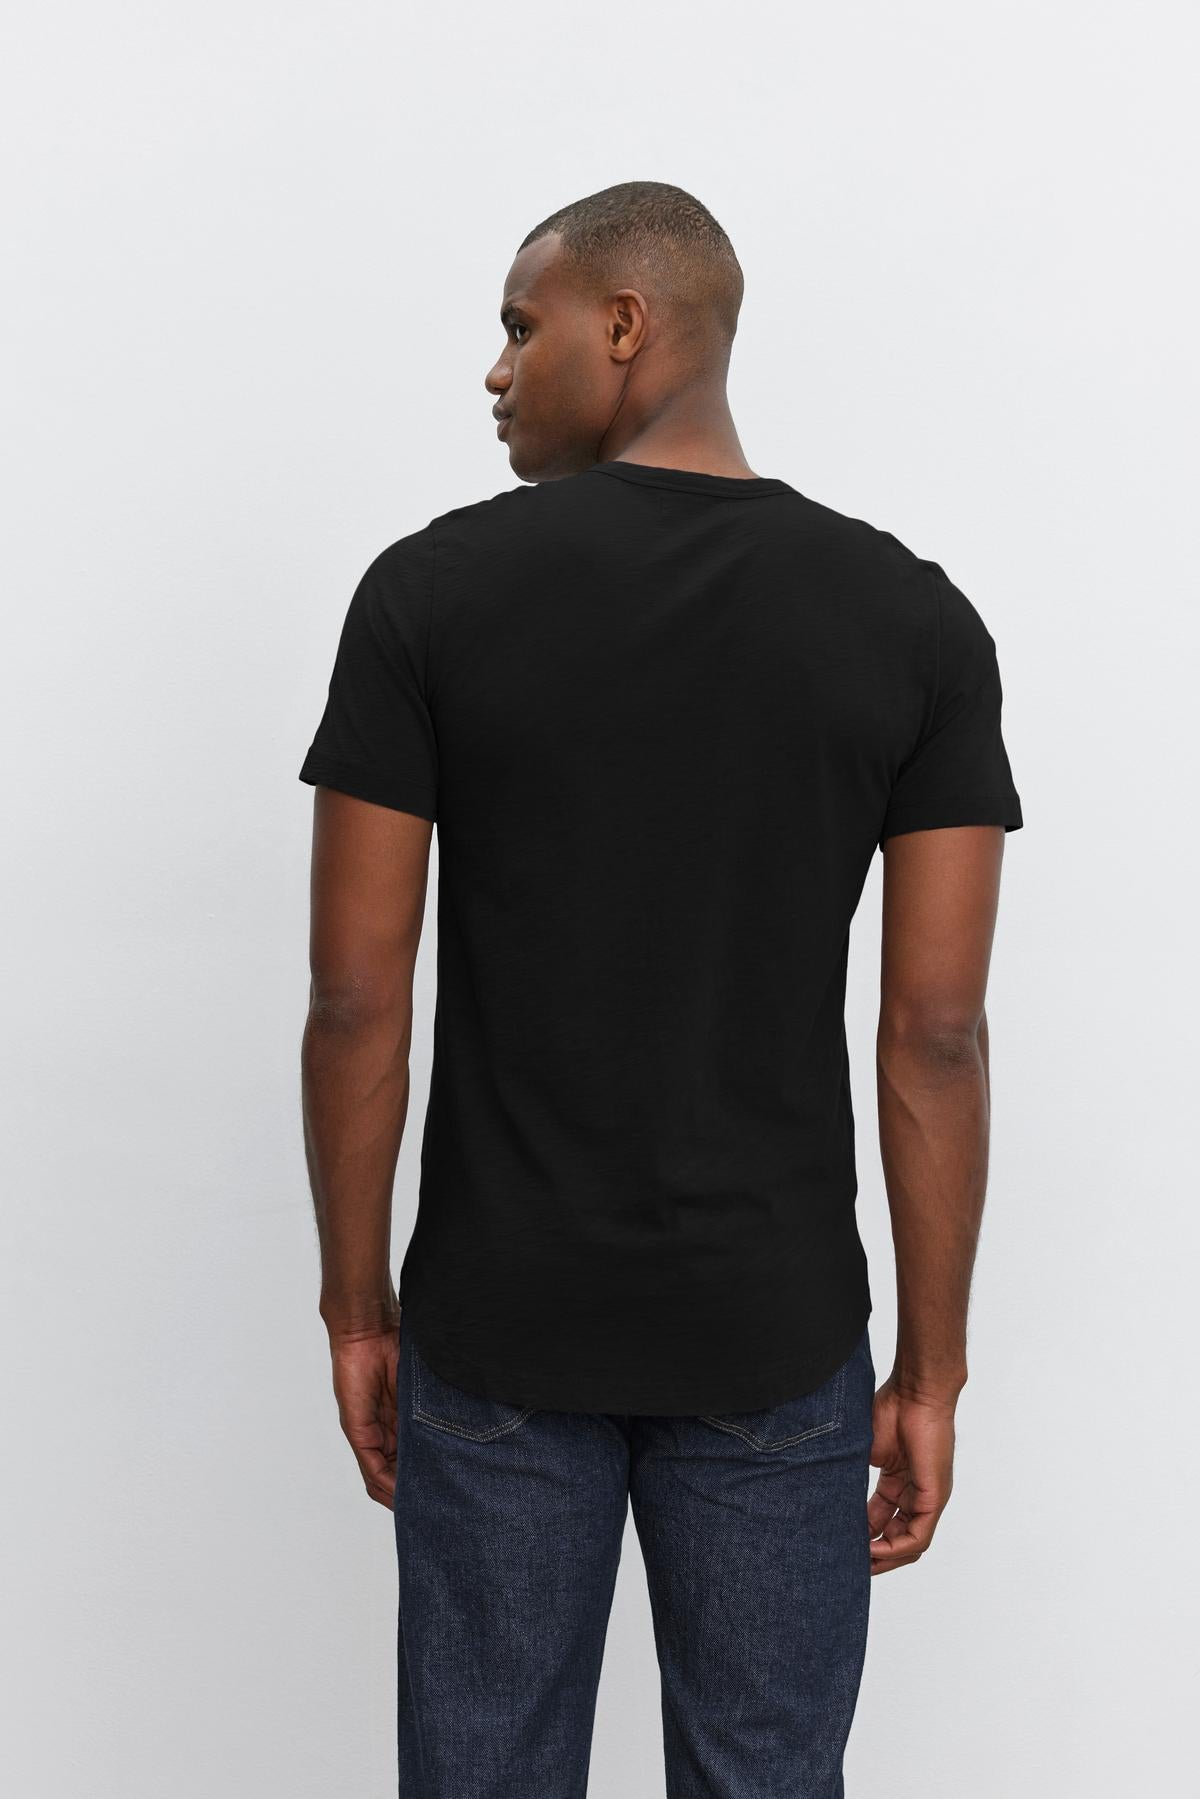   Man wearing a plain black, slub knit Velvet by Graham & Spencer AMARO TEE with a crew neck, viewed from the back. 